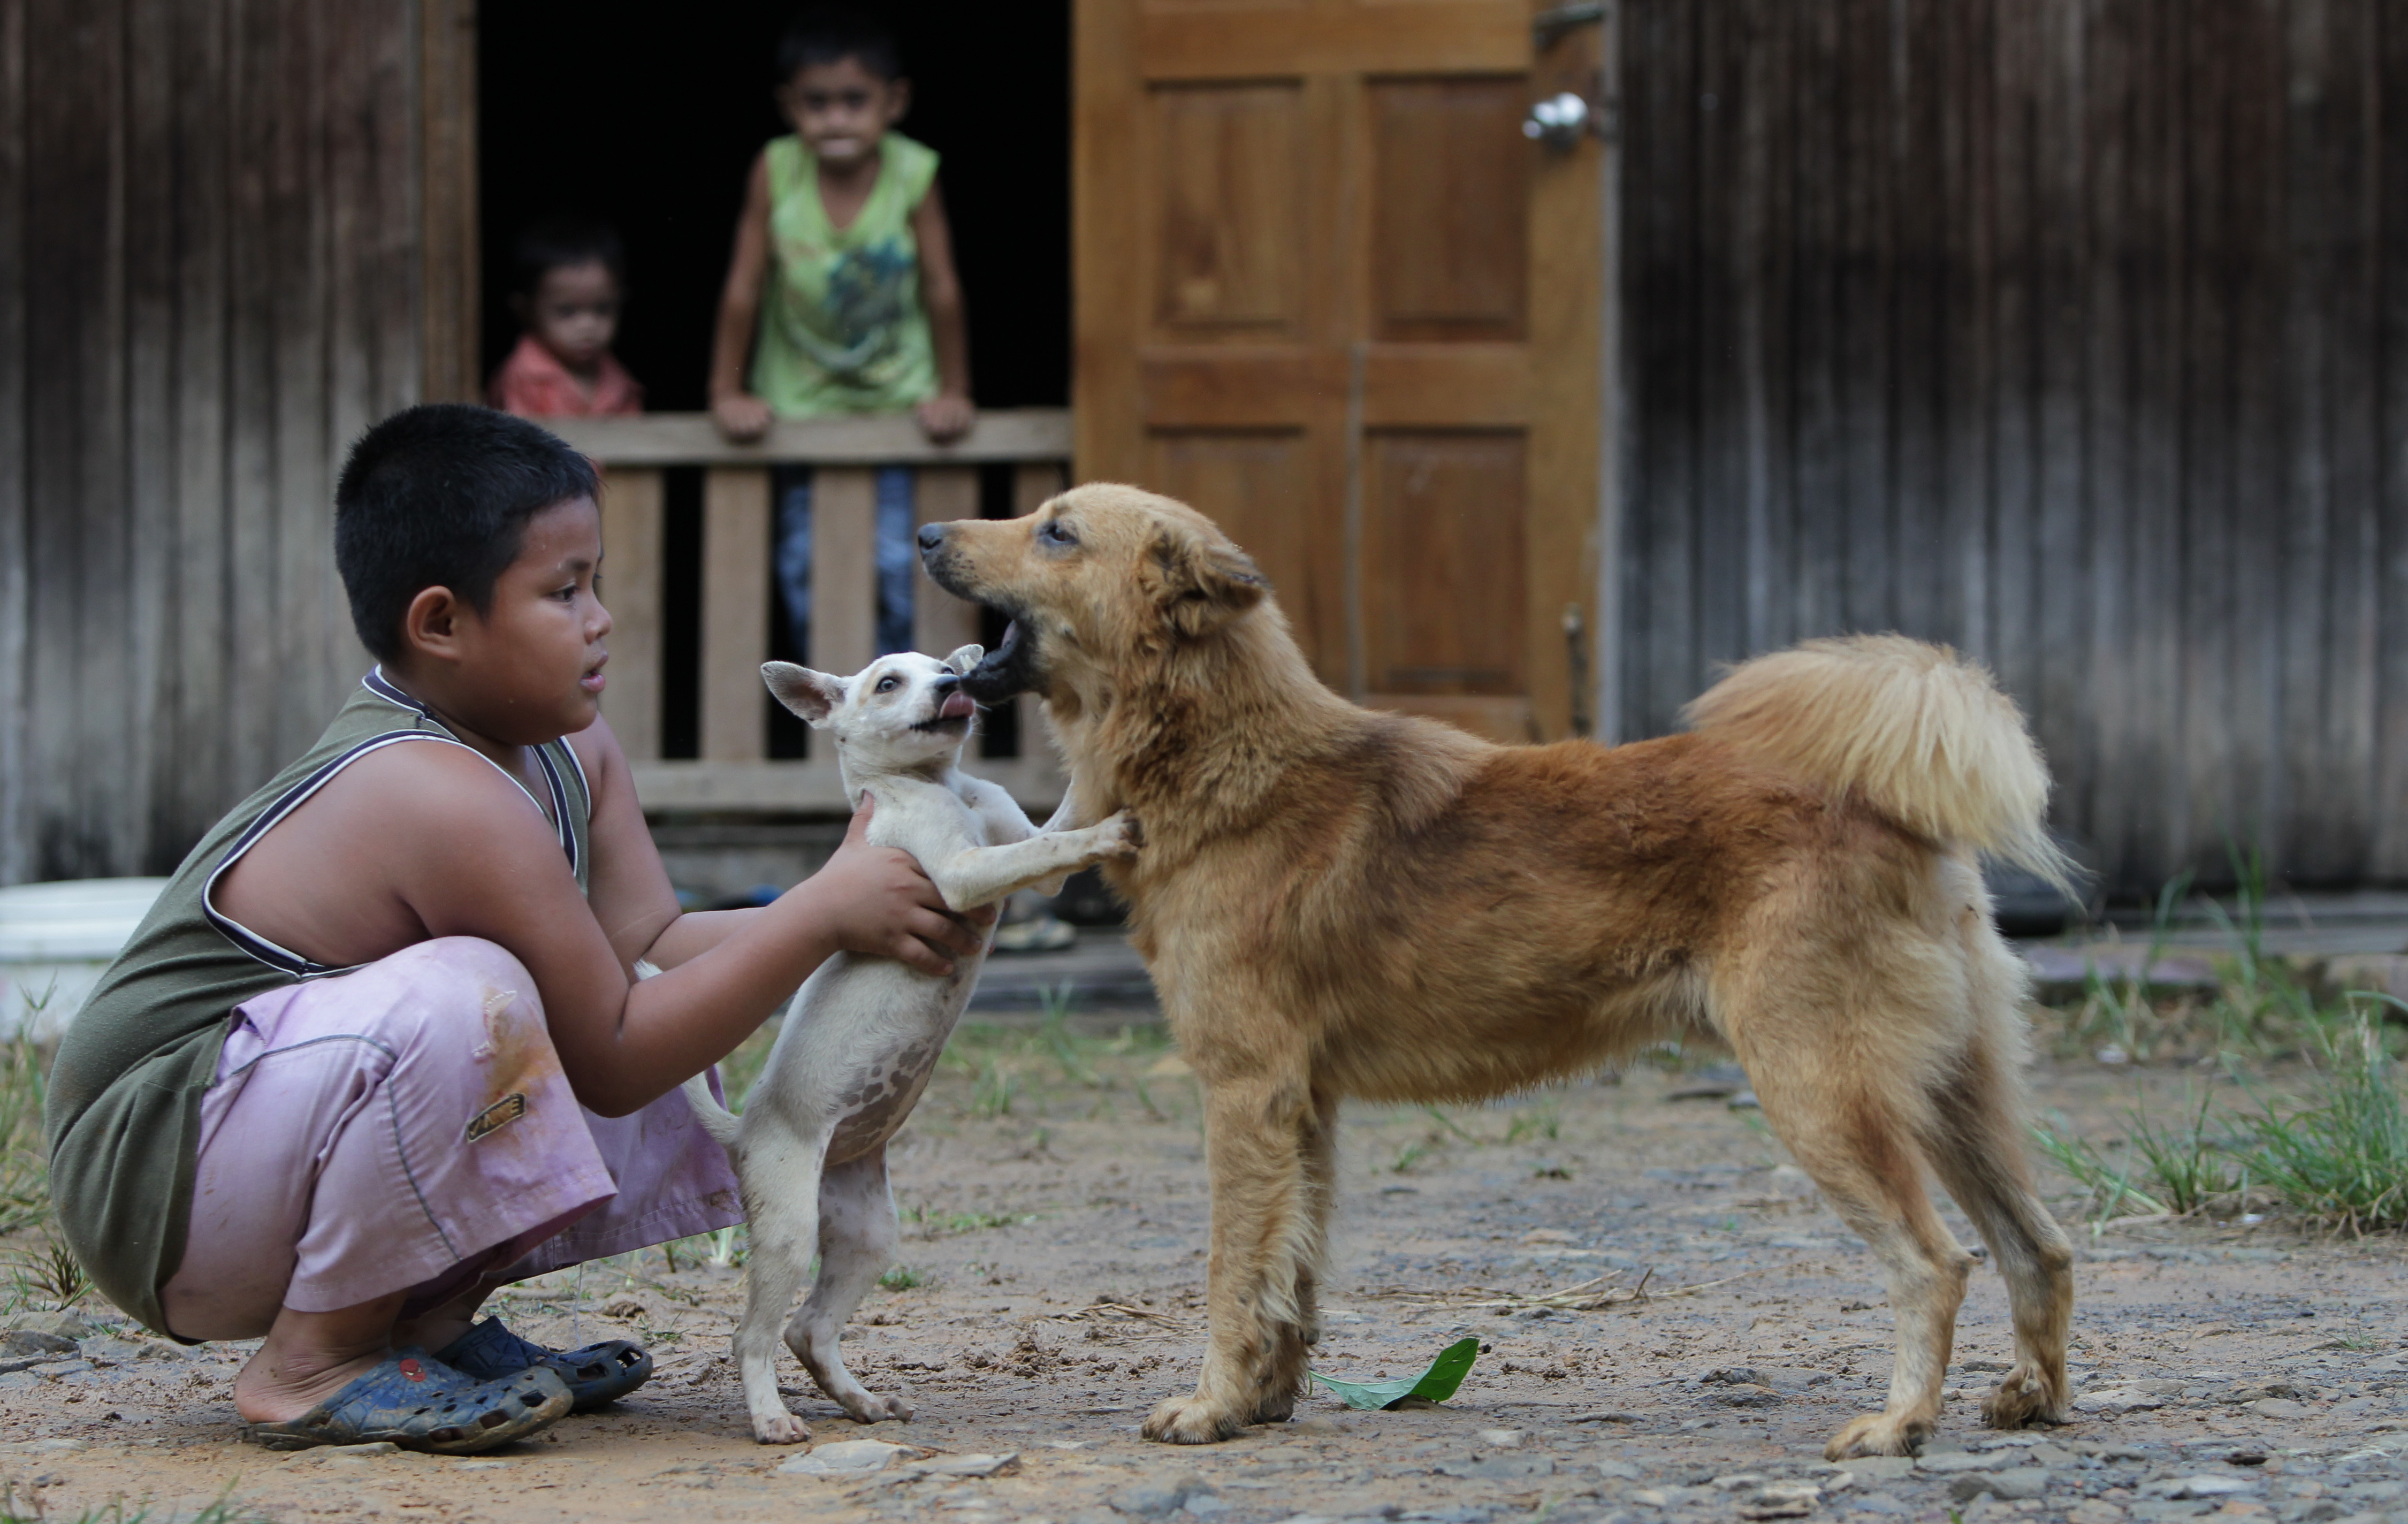 Dogs: Death Threats for Malaysian Man Who Organized Dog-Petting Event | Time